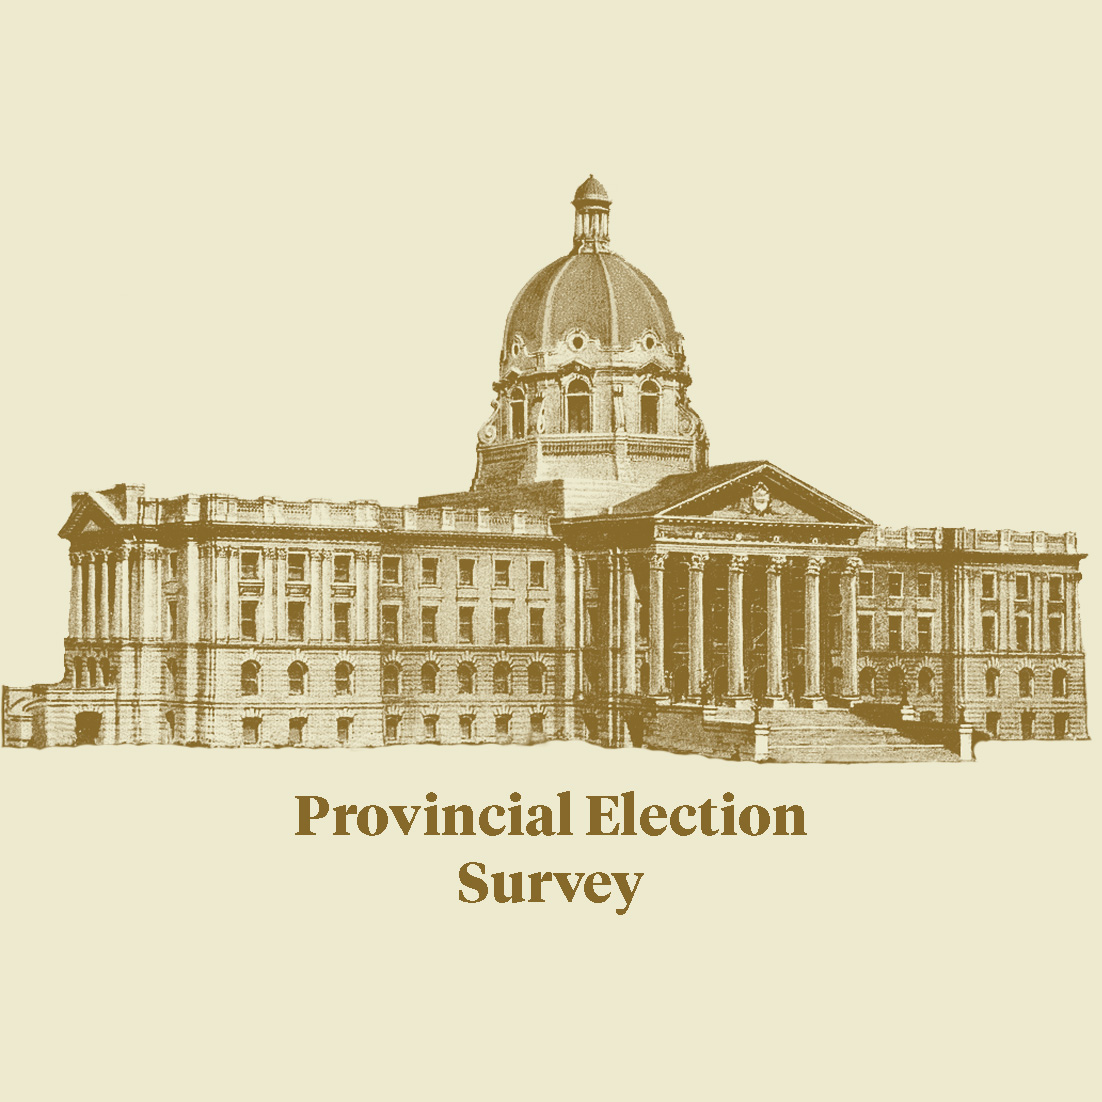 Heritage Calgary worked with @AlbertaMuseums and @yegheritage to develop a provincial election survey for parties to indicate their positions on heritage & museums. The UCP has not yet responded; the Alberta NDP response can be found on our website: heritagecalgary.ca/heritage-policy